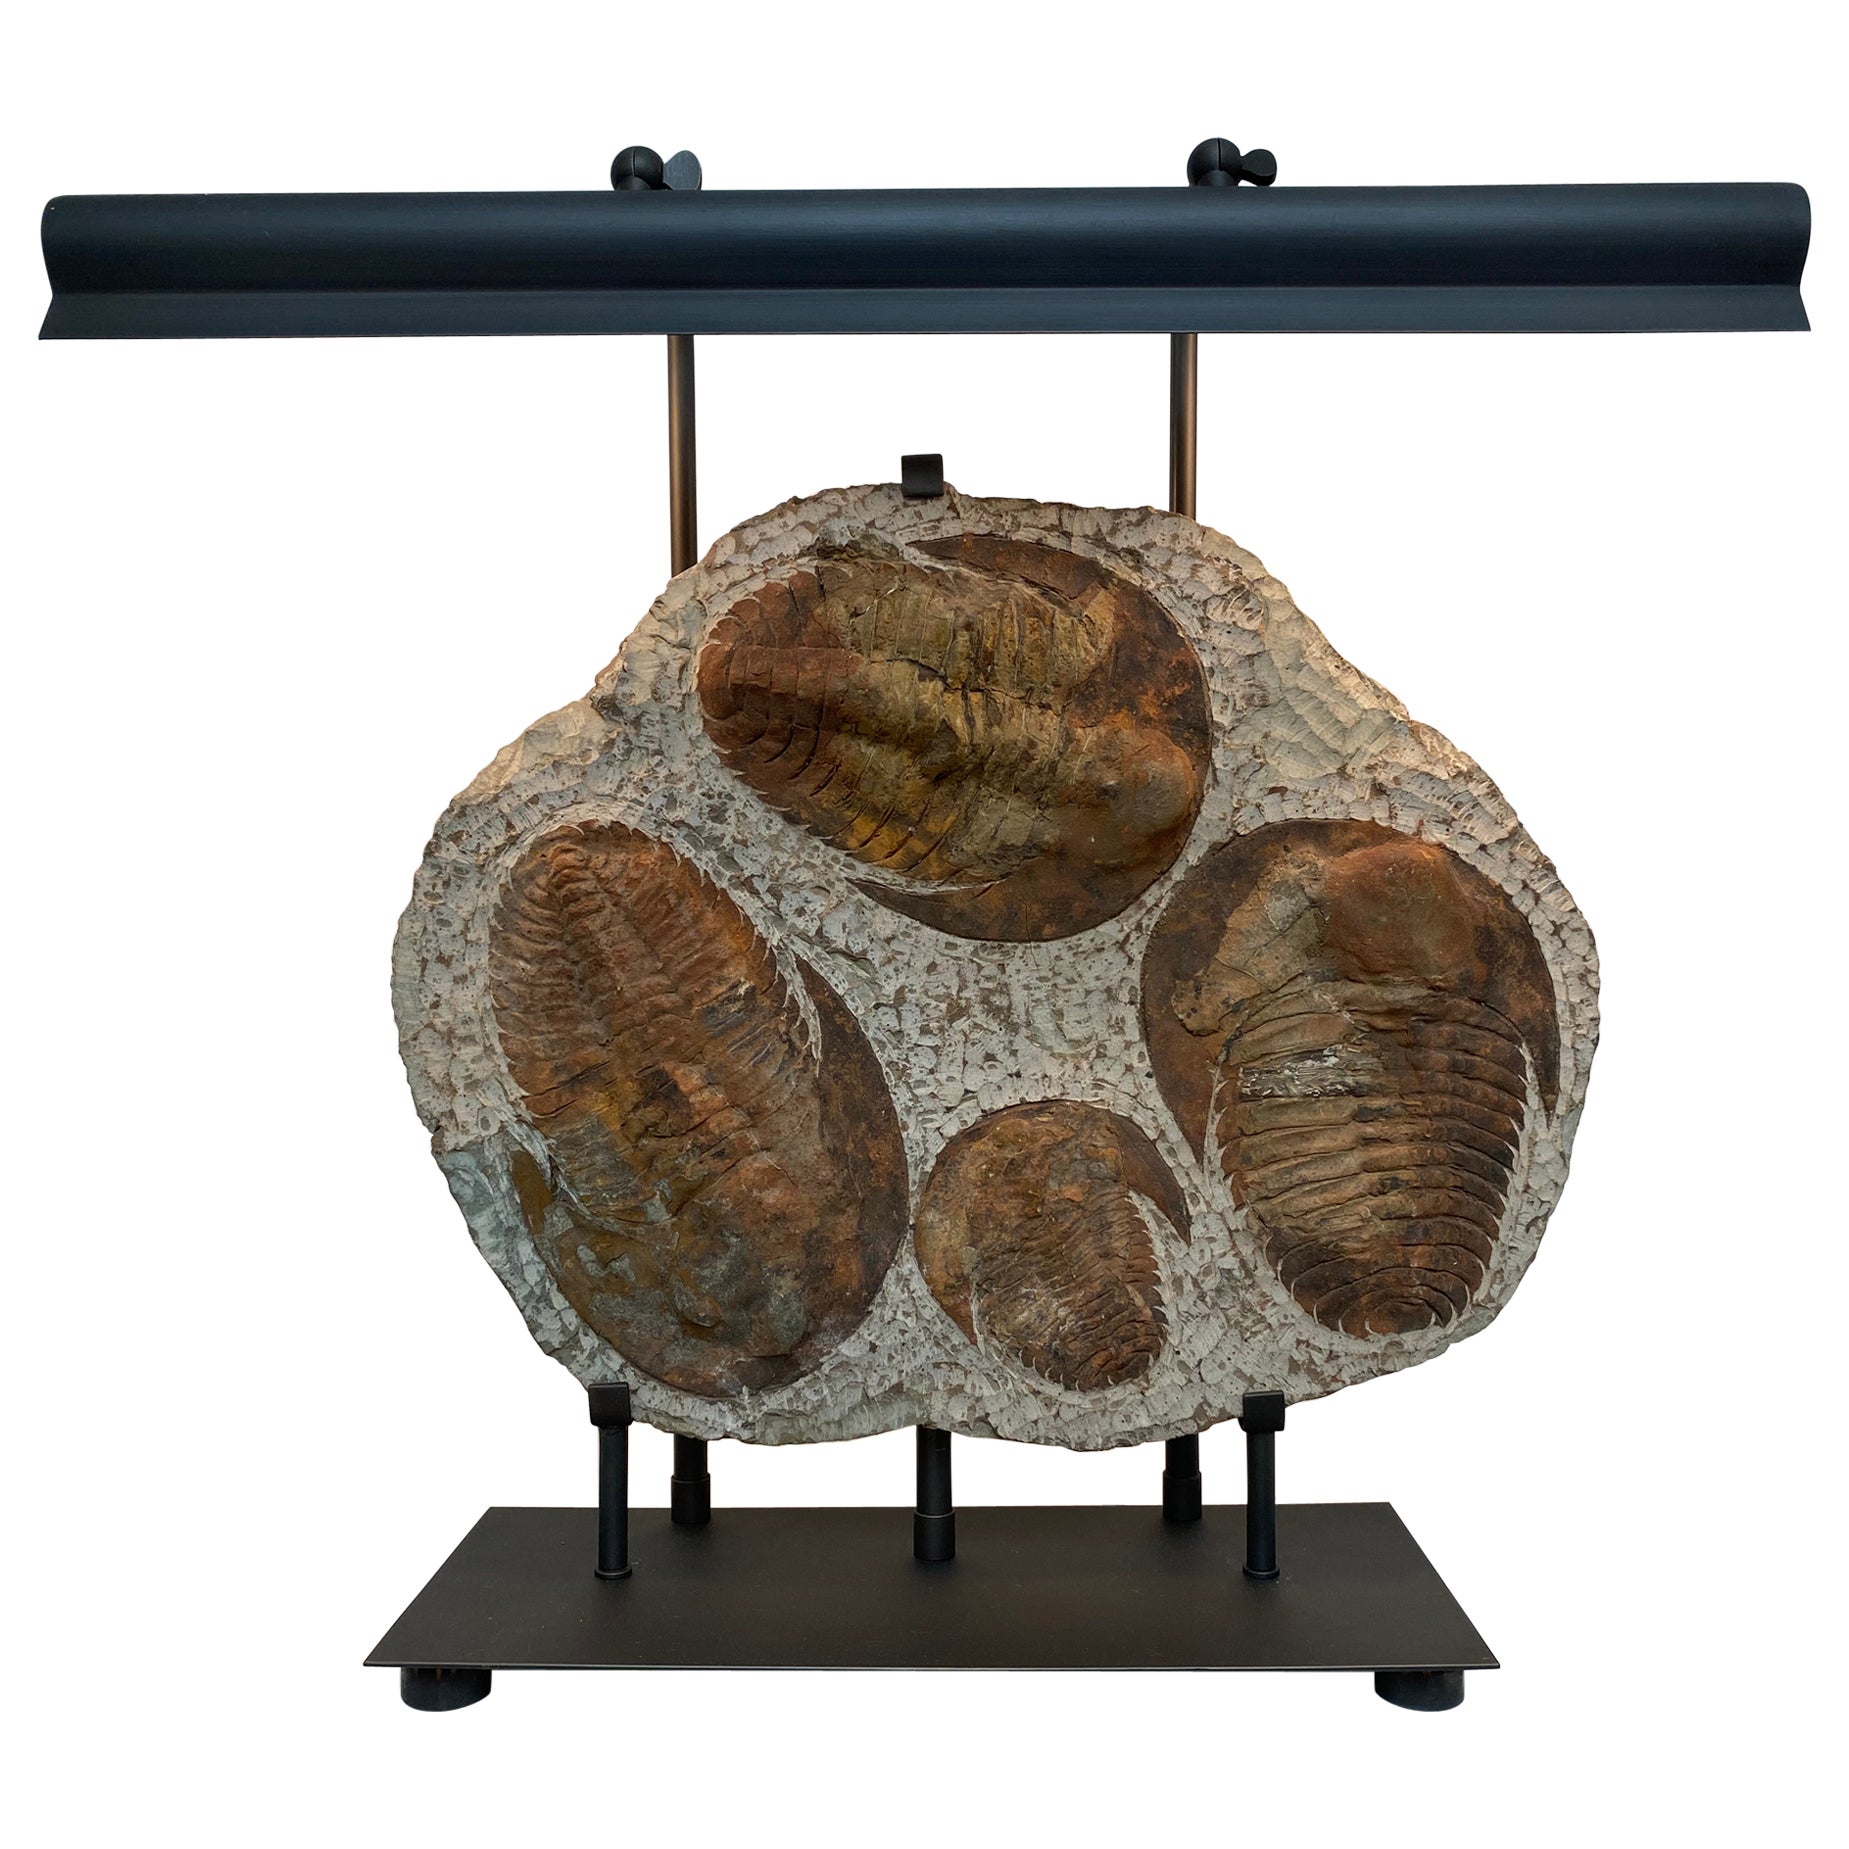 Table Lamp made out of 4  Trilobite Fossil Elements, mounted on an iron stand